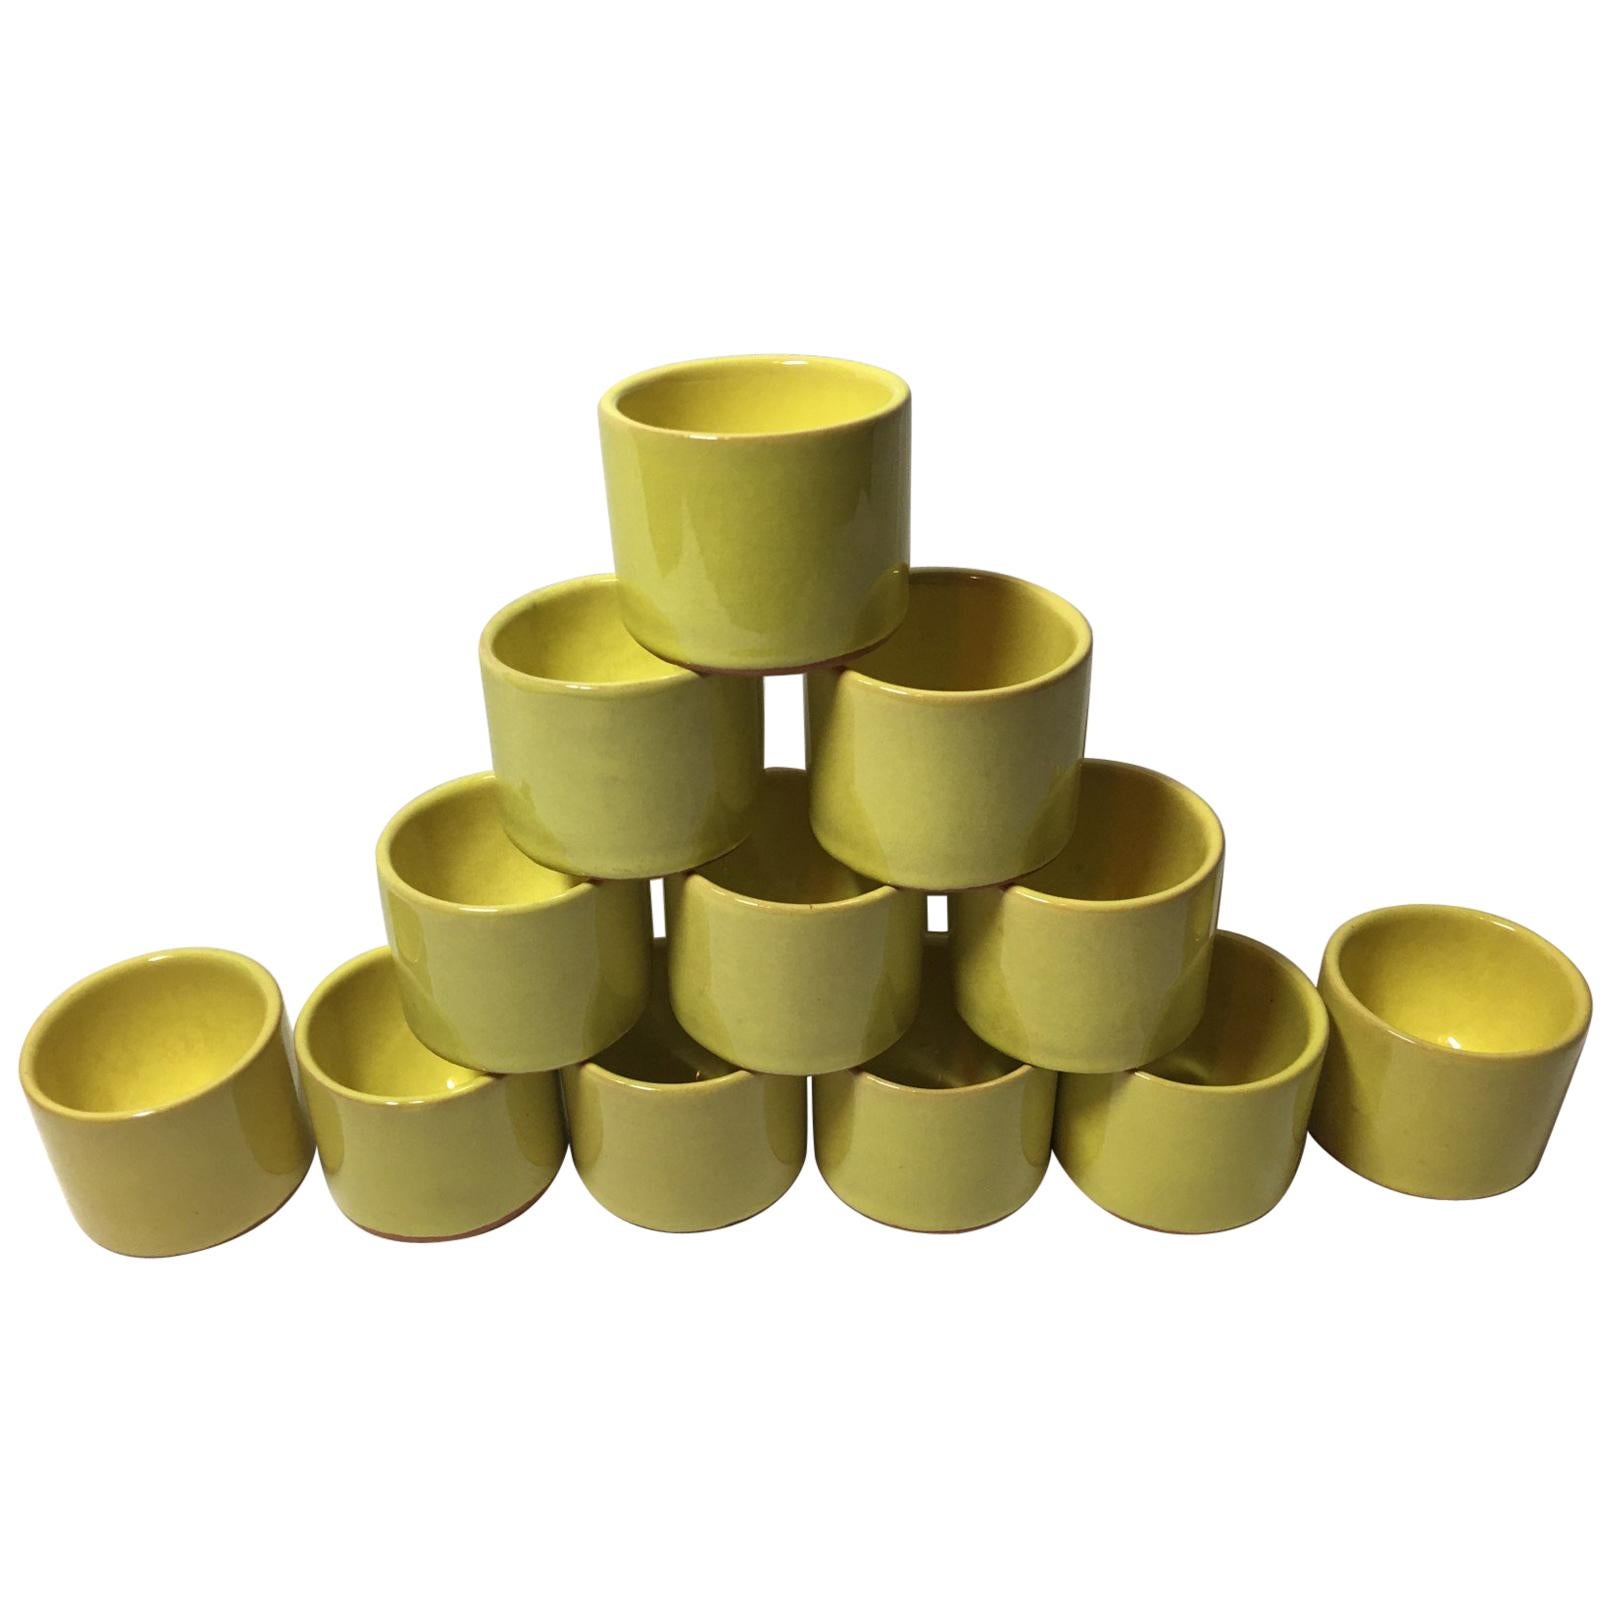 12 Ceramic Yellow Bijorn Wiinblad Egg Cups from the 1960's Rosenthal For Sale